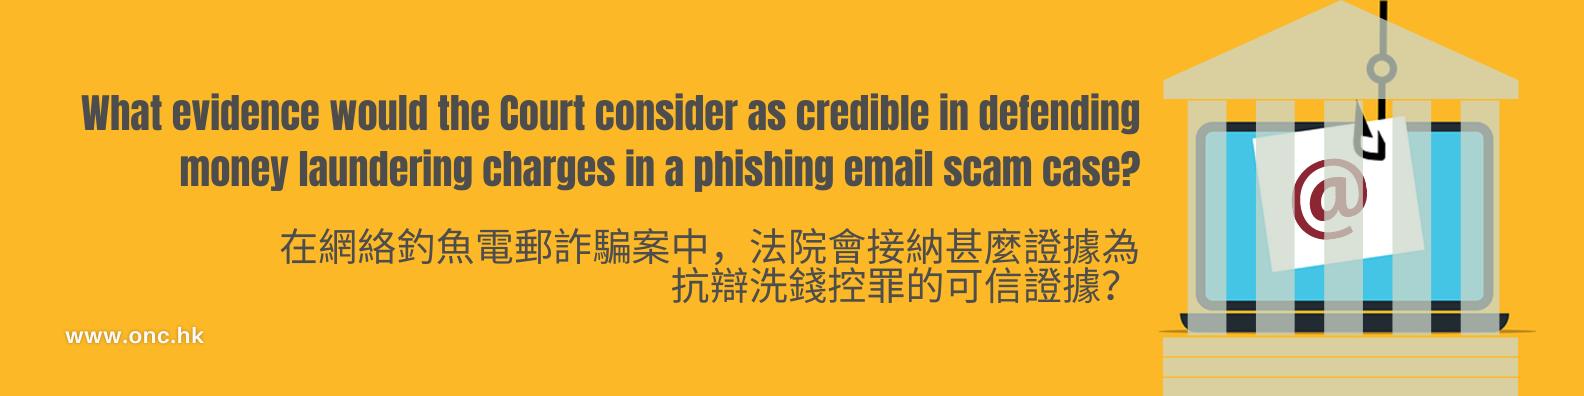 What evidence would the Court consider as credible in defending money laundering charges in a phishing email scam case?